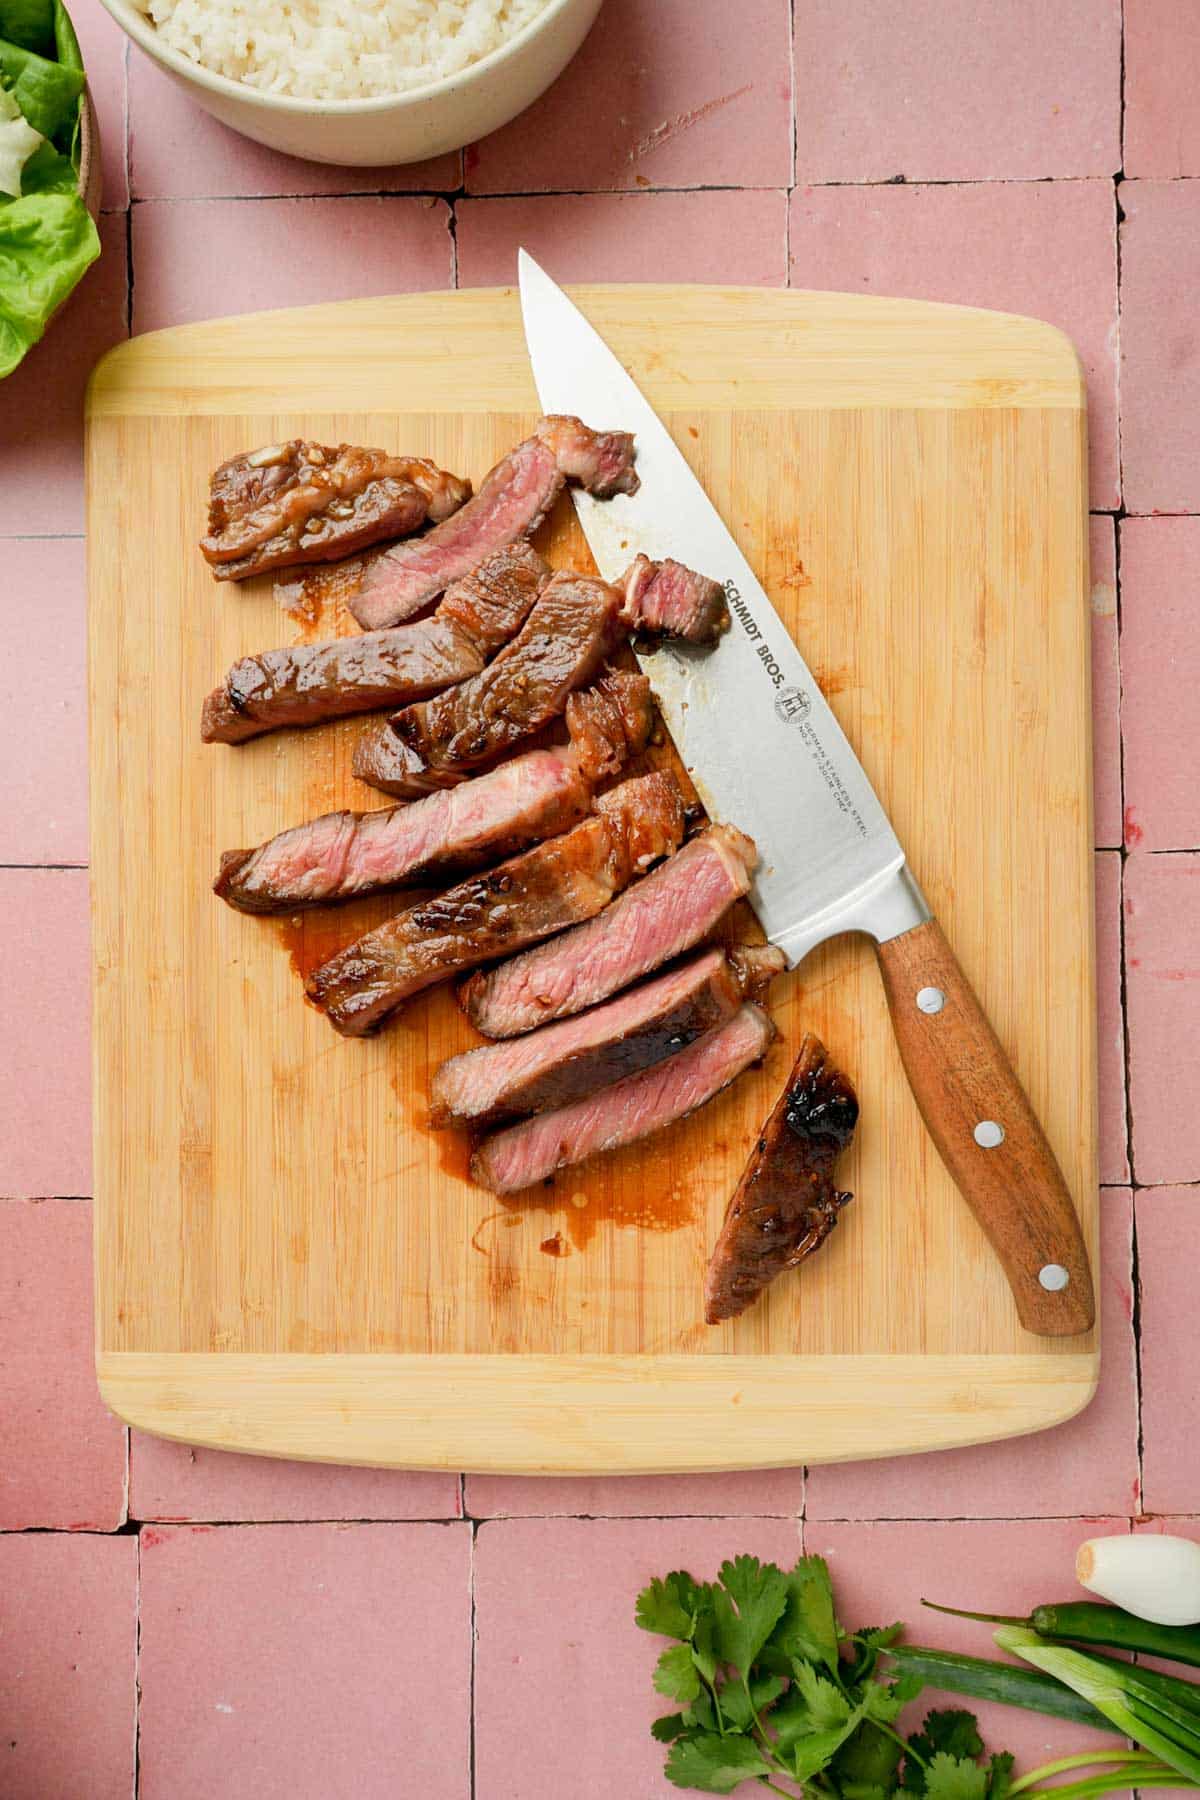 sliced up beef on a wood cutting board